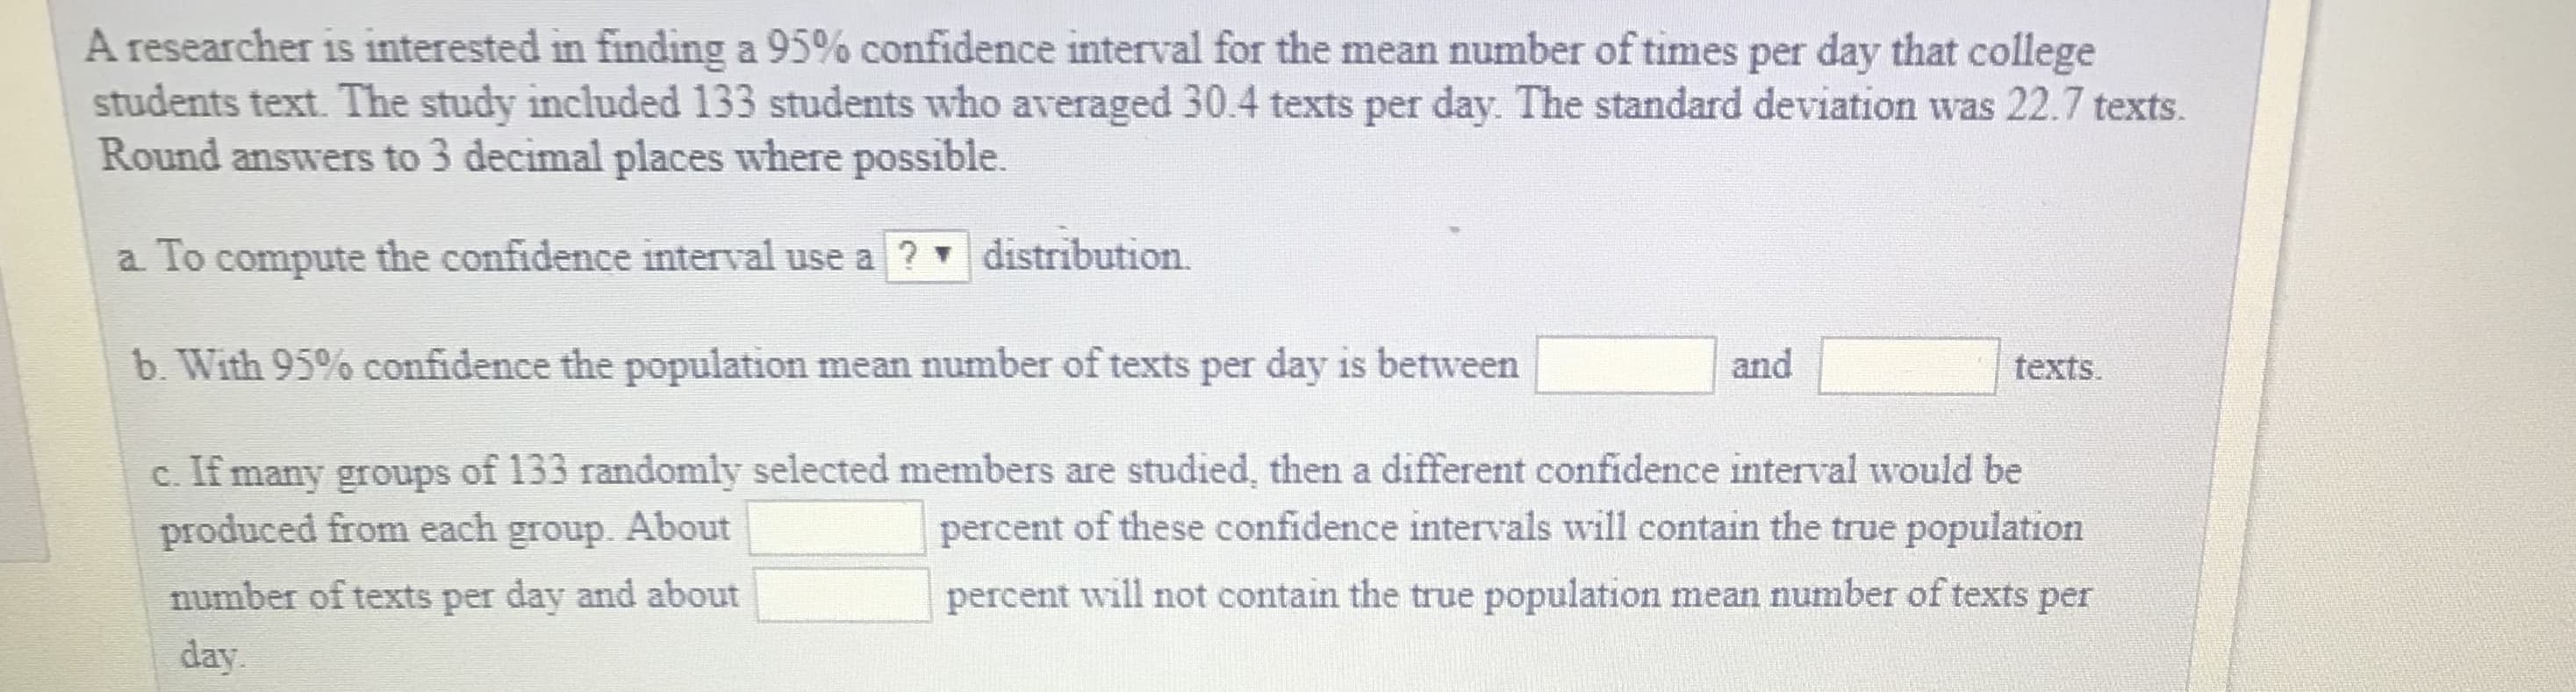 A researcher is interested in finding a 95% confidence interval for the mean number of times per day that college
students text. The study included 133 students who averaged 30.4 texts per day. The standard deviation was 22.7 texts.
Round answers to 3 decimal places where possible.
a To compute the confidence interval use a
distribution.
b. With 95% confidence the population mean number of texts per day is between
and
texts.
c. If many groups of 133 randomly selected members are studied, then a different confidence interval would be
produced from each group. About
number of texts per day and about
day
percent of these confidence intervals will contain the true population
percent will not contain the true population mean number of texts per
